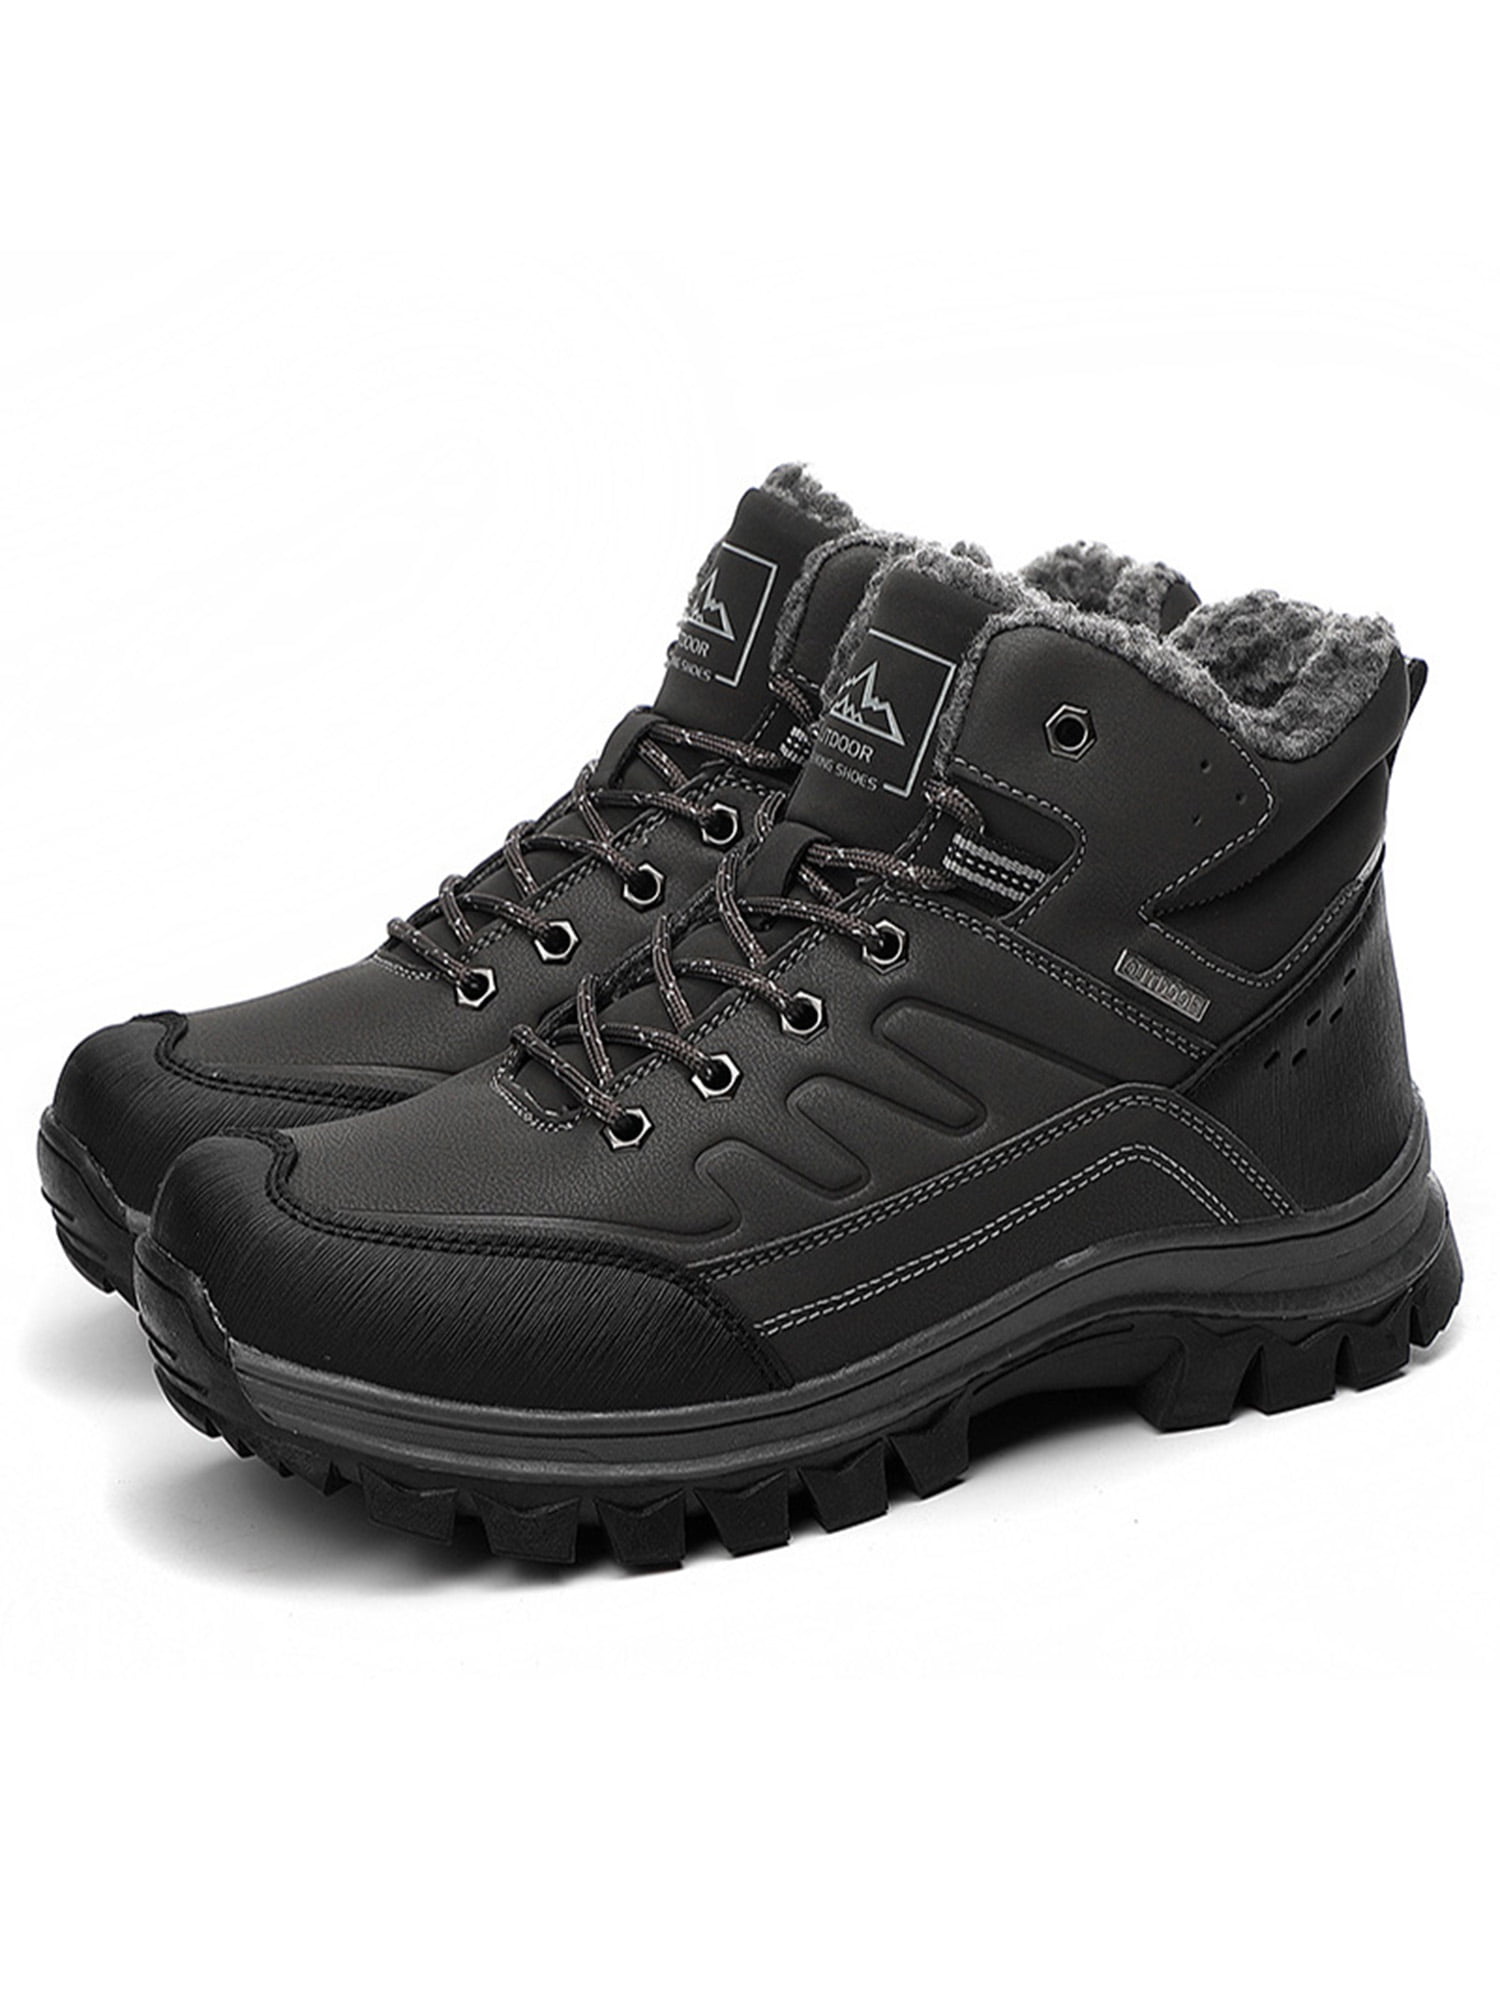 Details about   Men's Steel Toe Sneakers Athletic Breathable Climbing Waterproof Sports Boots 